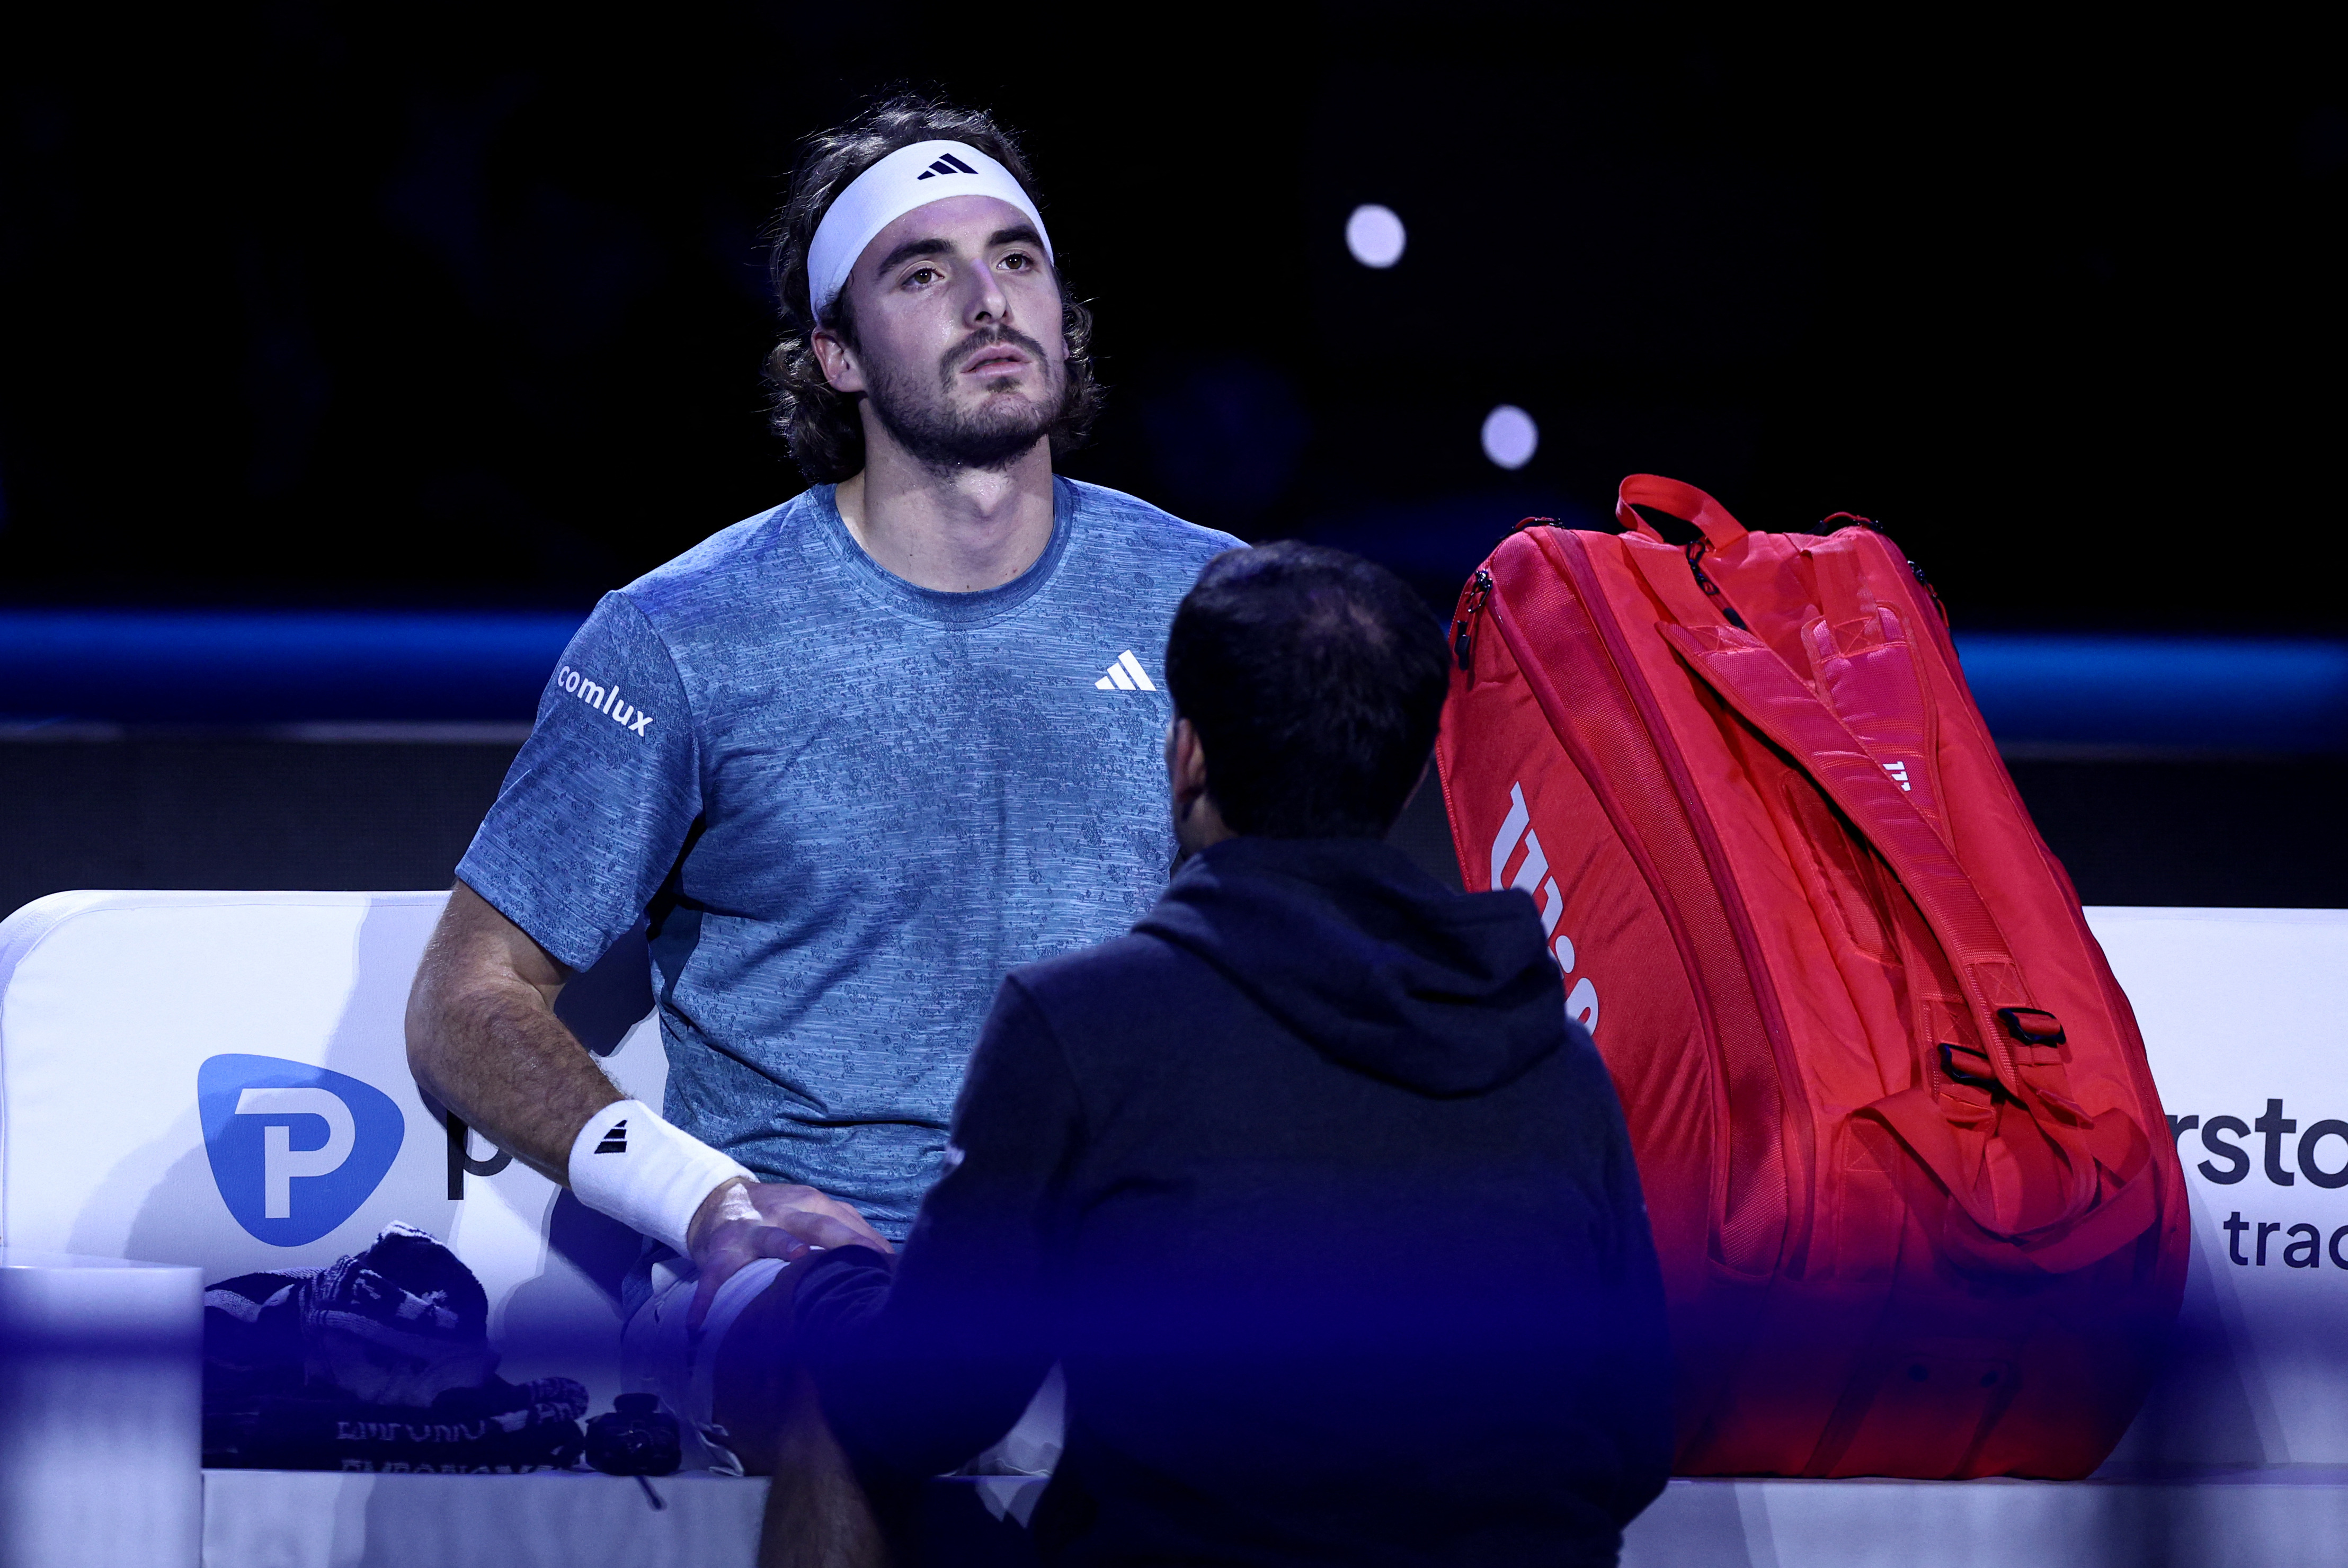 Tennis: ATP Finals Group: Who will be in the same group as